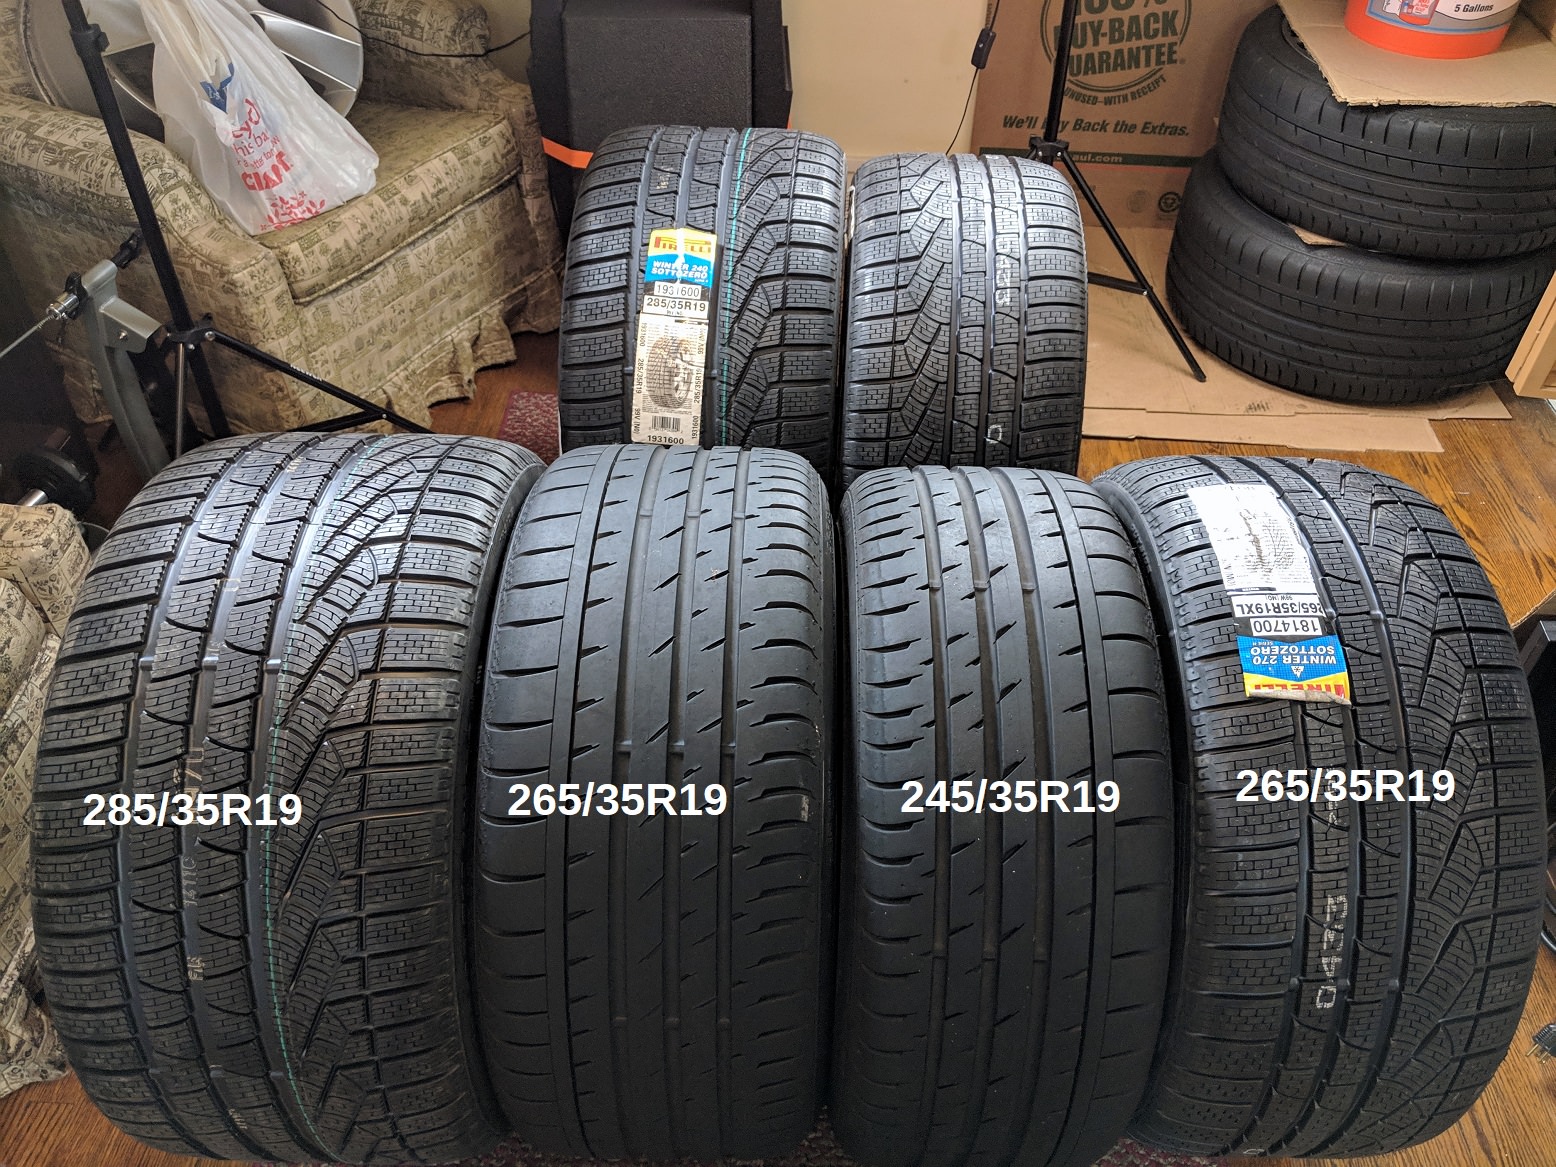 245 vs 265 Tires: Comparing Performance and Fit